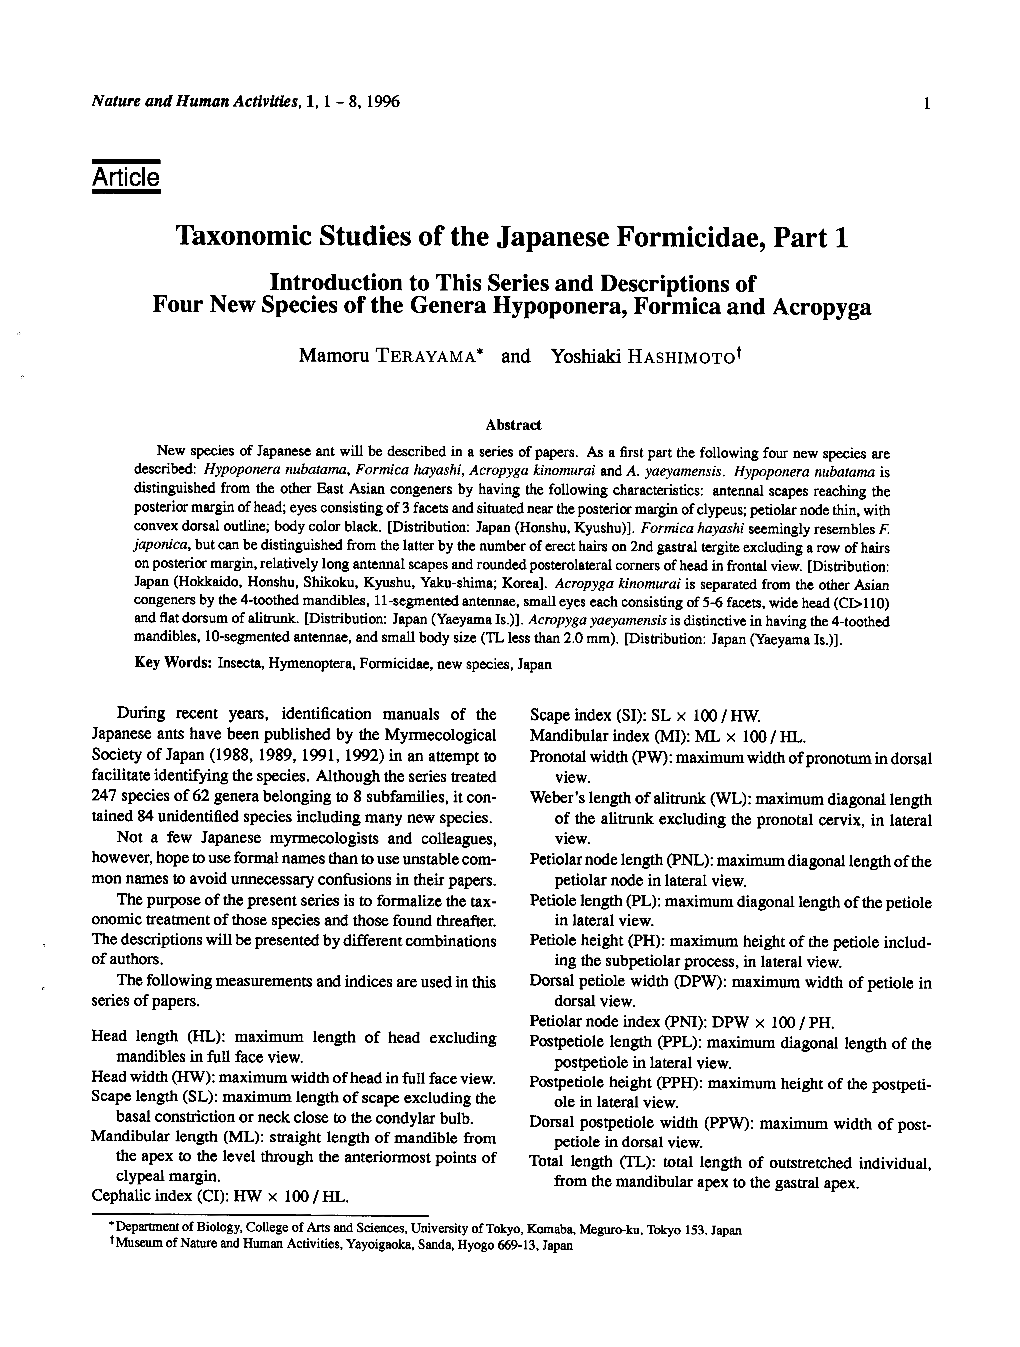 Taxonomic Studies of the Japanese Formicidae, Part 1